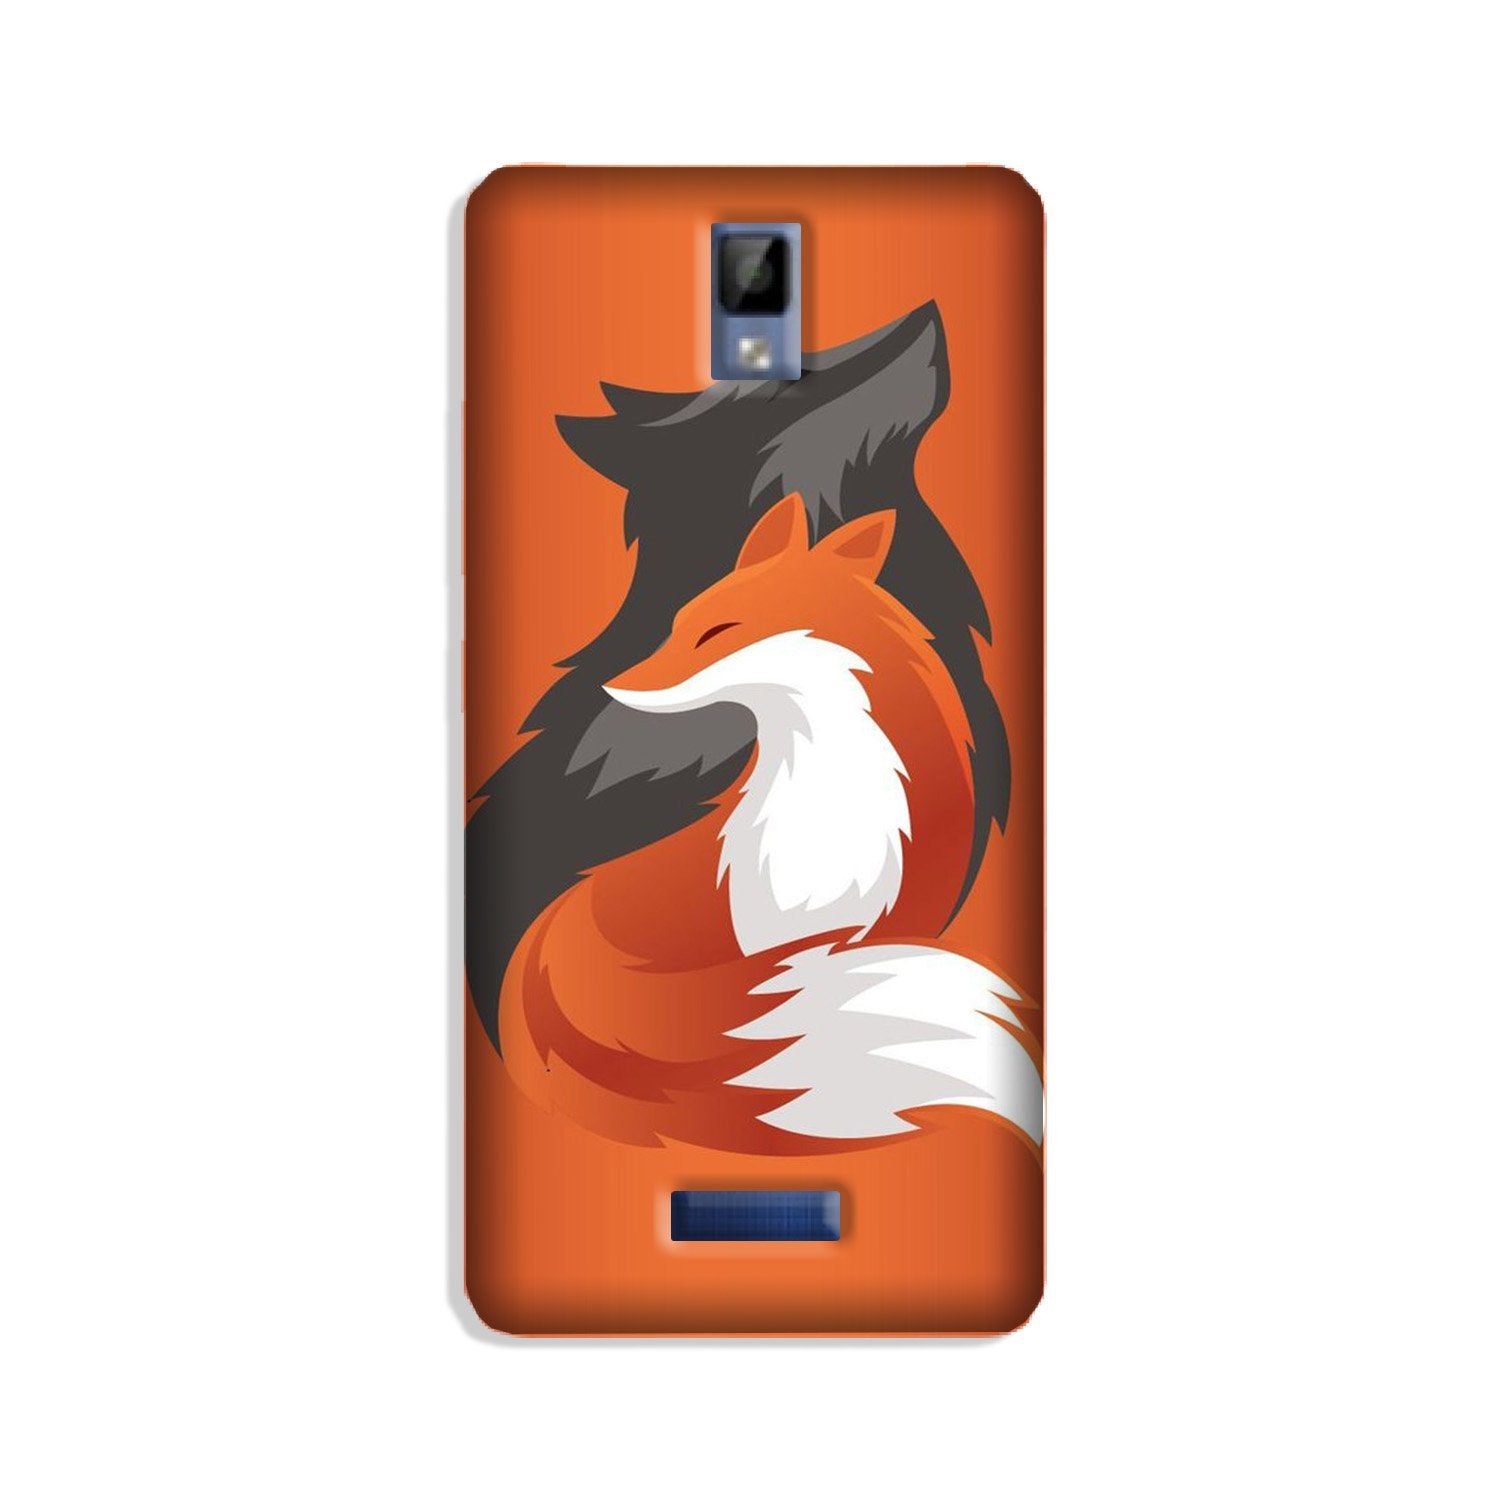 WolfCase for Gionee P7 (Design No. 224)